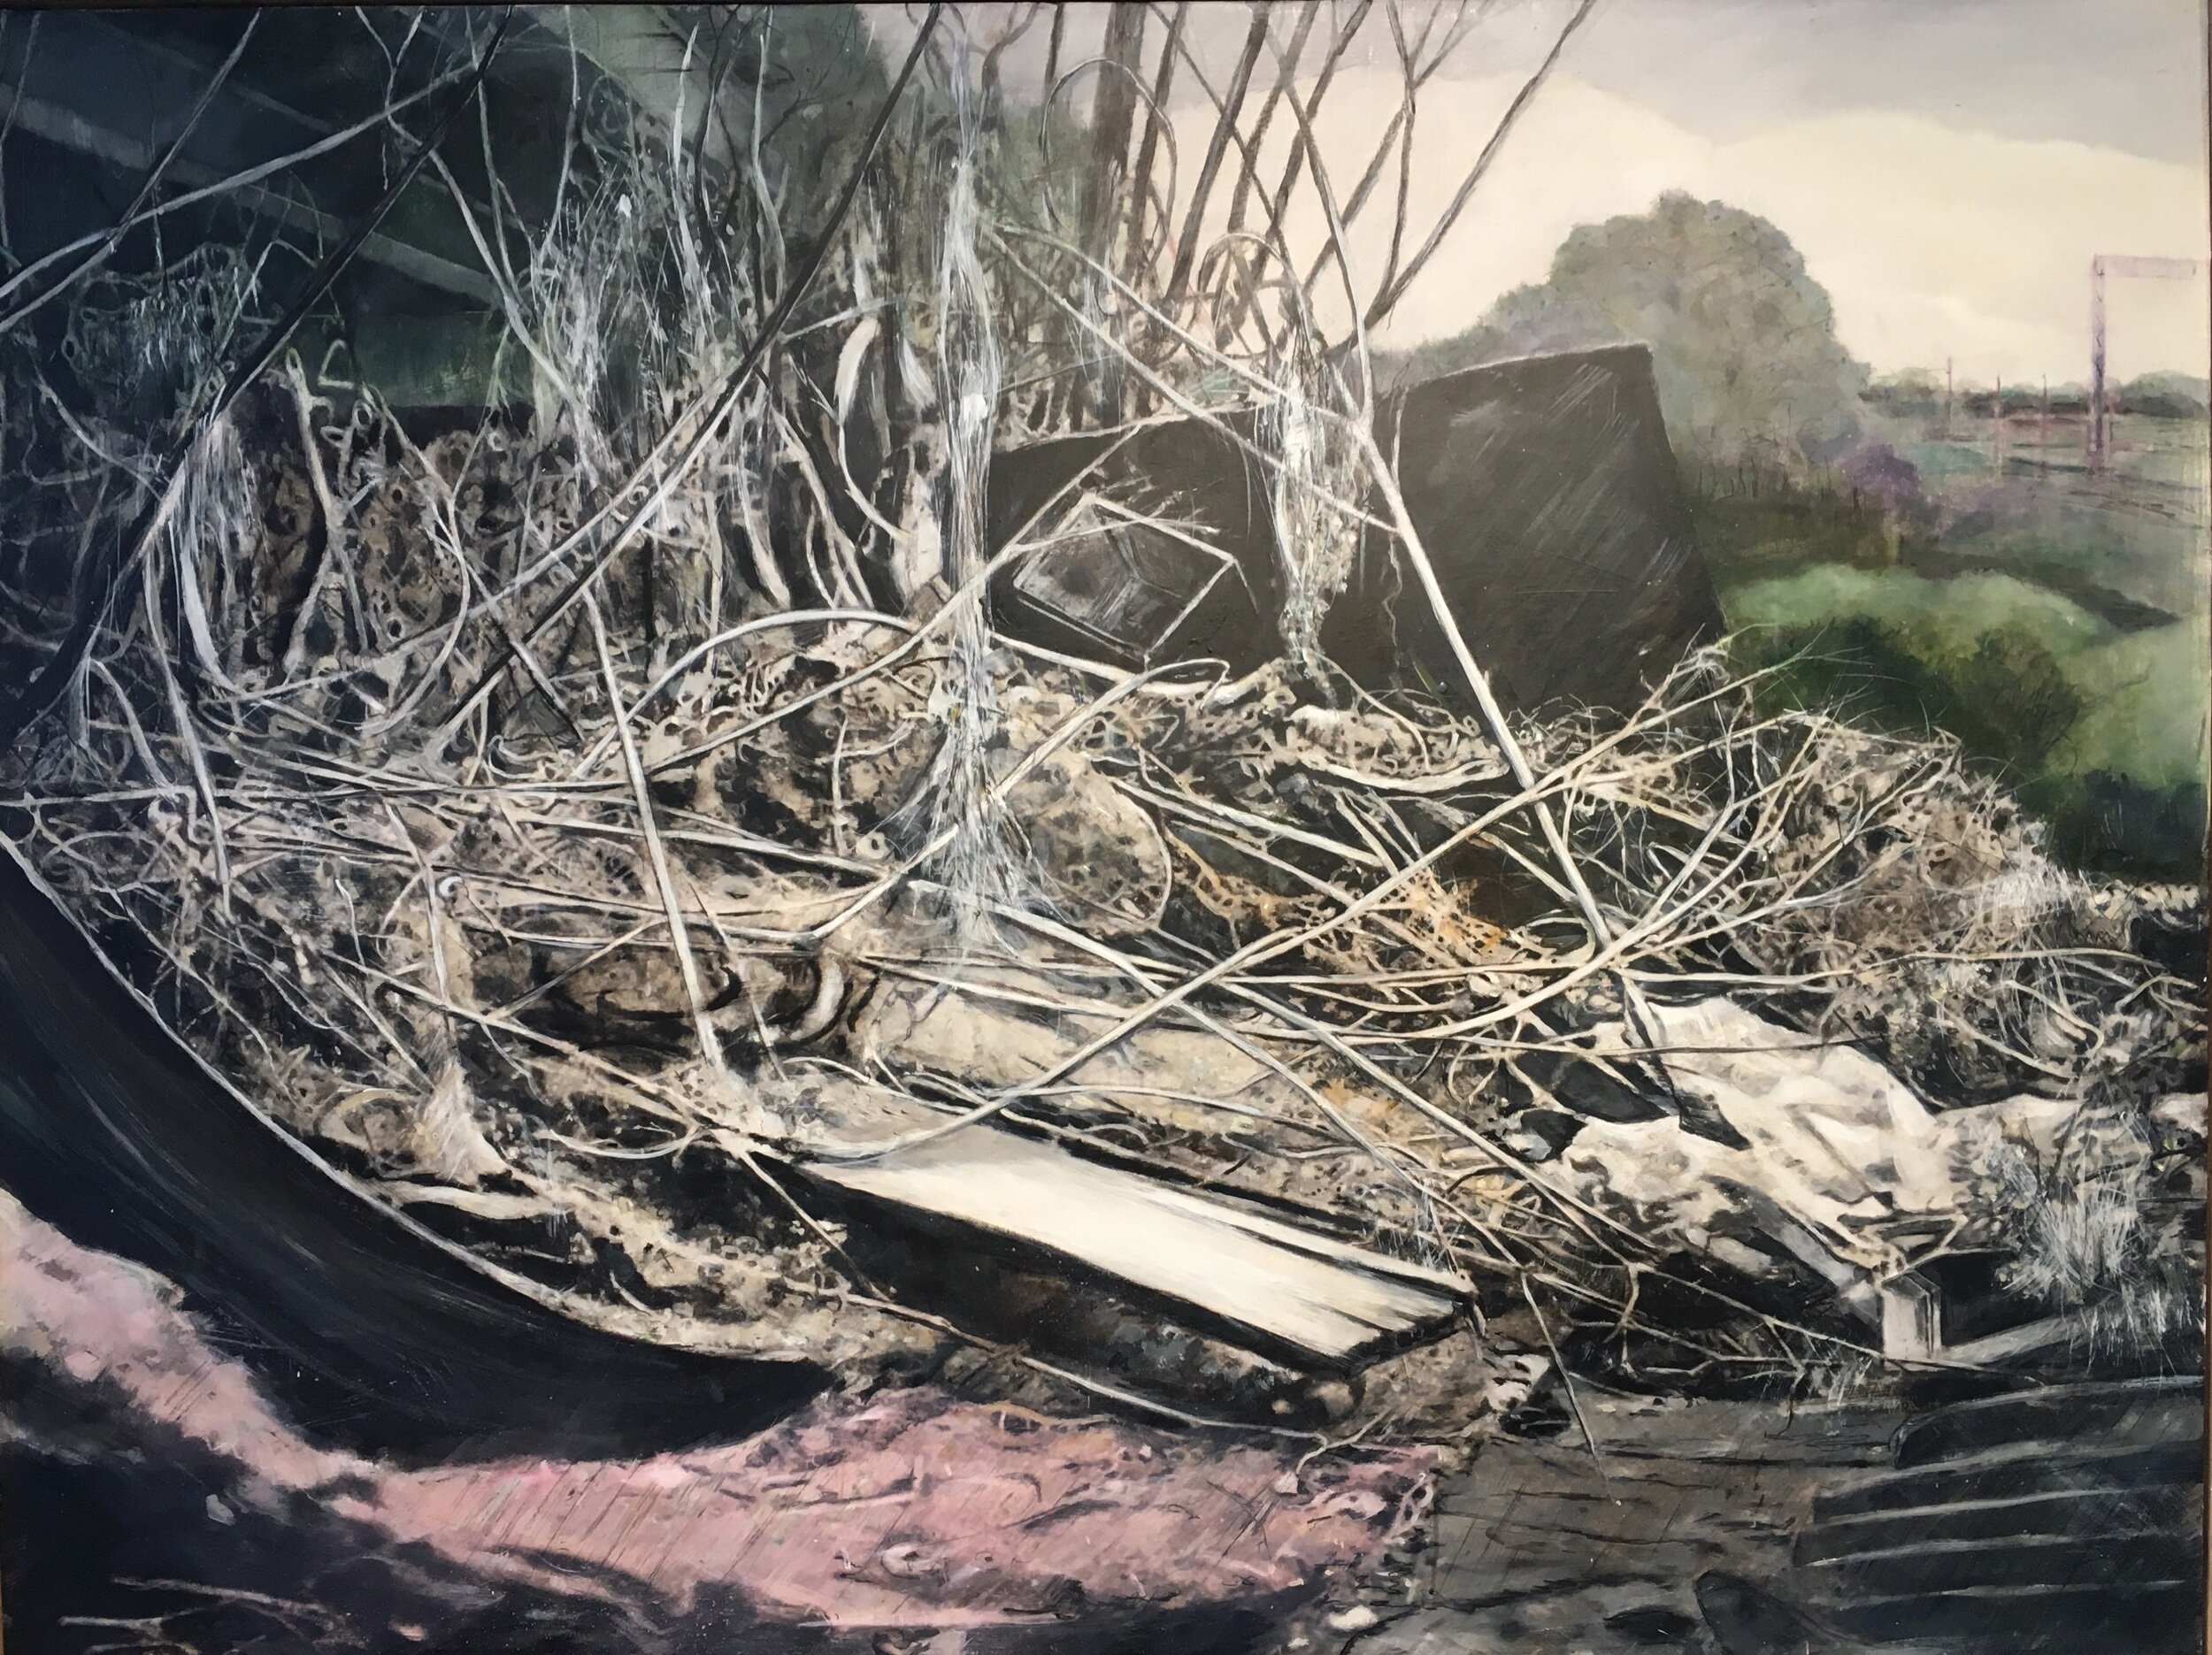   Murmur of a faded landscape  2019  oil and mixed media on gesso hardboard  81 x 100 cm 